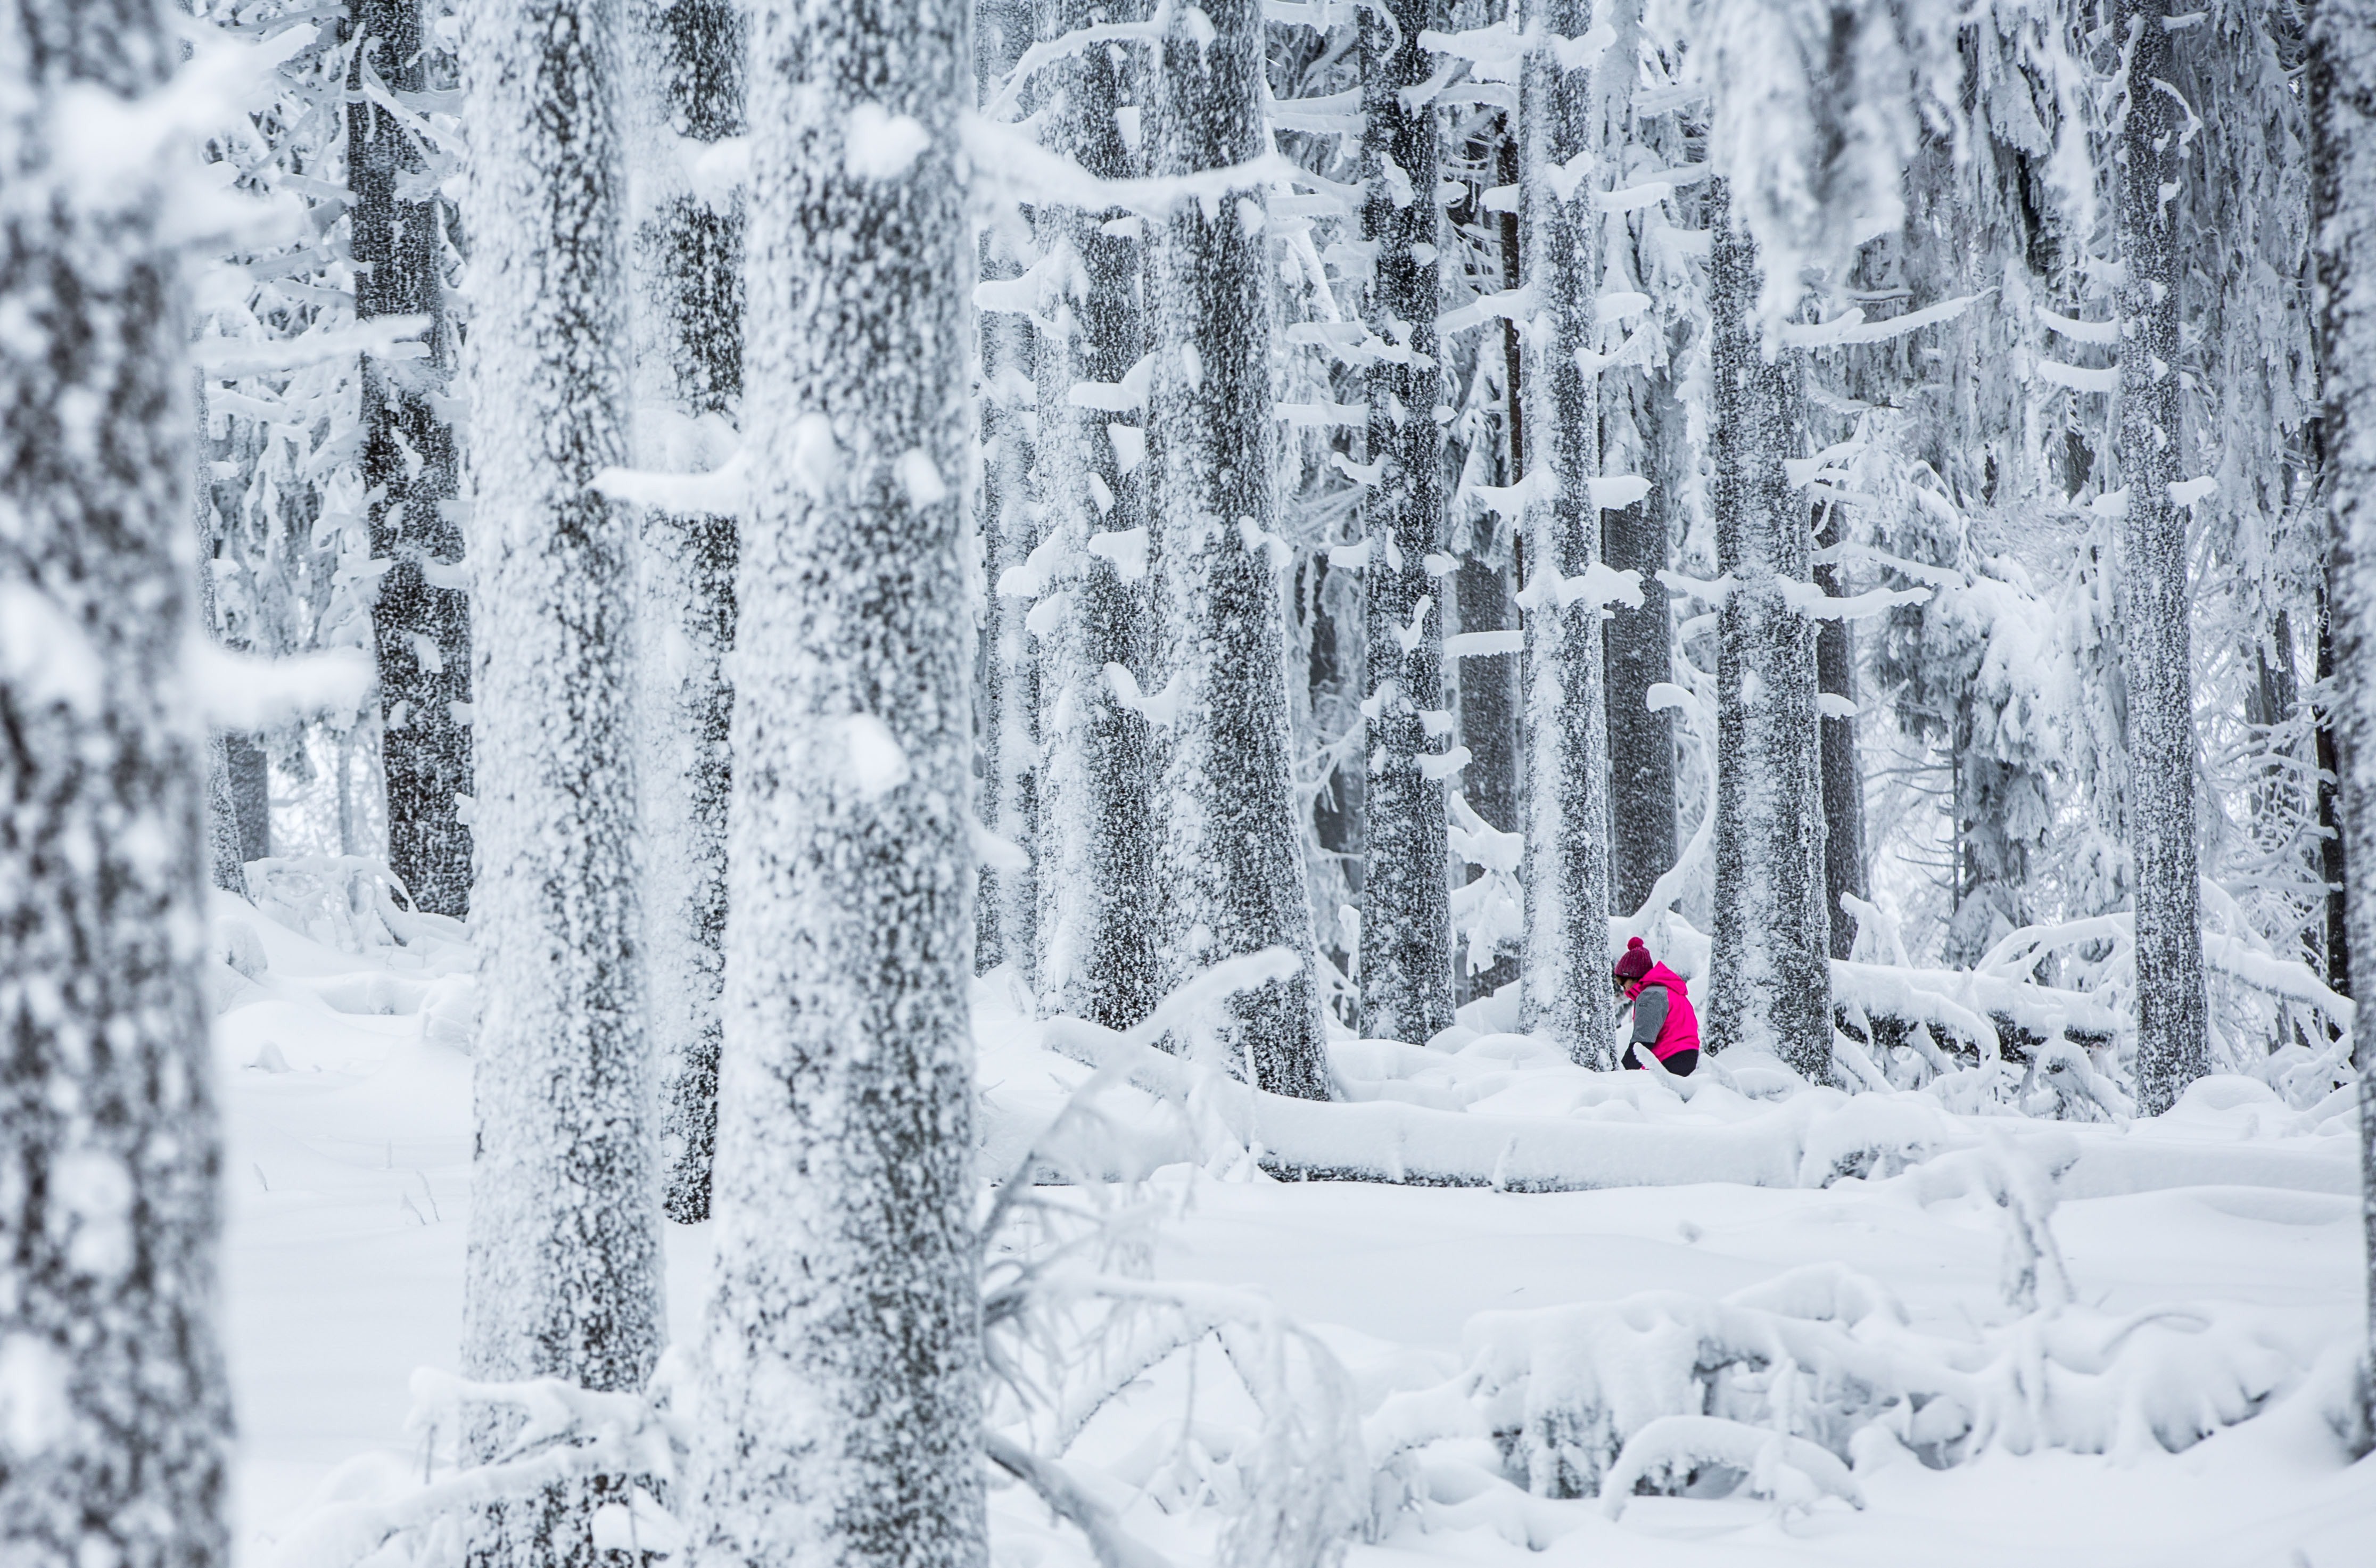 A woman walks through the snowy forest on the Grosser Feldberg mountain in the Taunus region near Frankfurt am Main, western Germany, on January 30, 2015. AFP PHOTO / DPA / FRANK RUMPENHORST +++ GERMANY OUT (Photo credit should read FRANK RUMPENHORST/AFP/Getty Images)